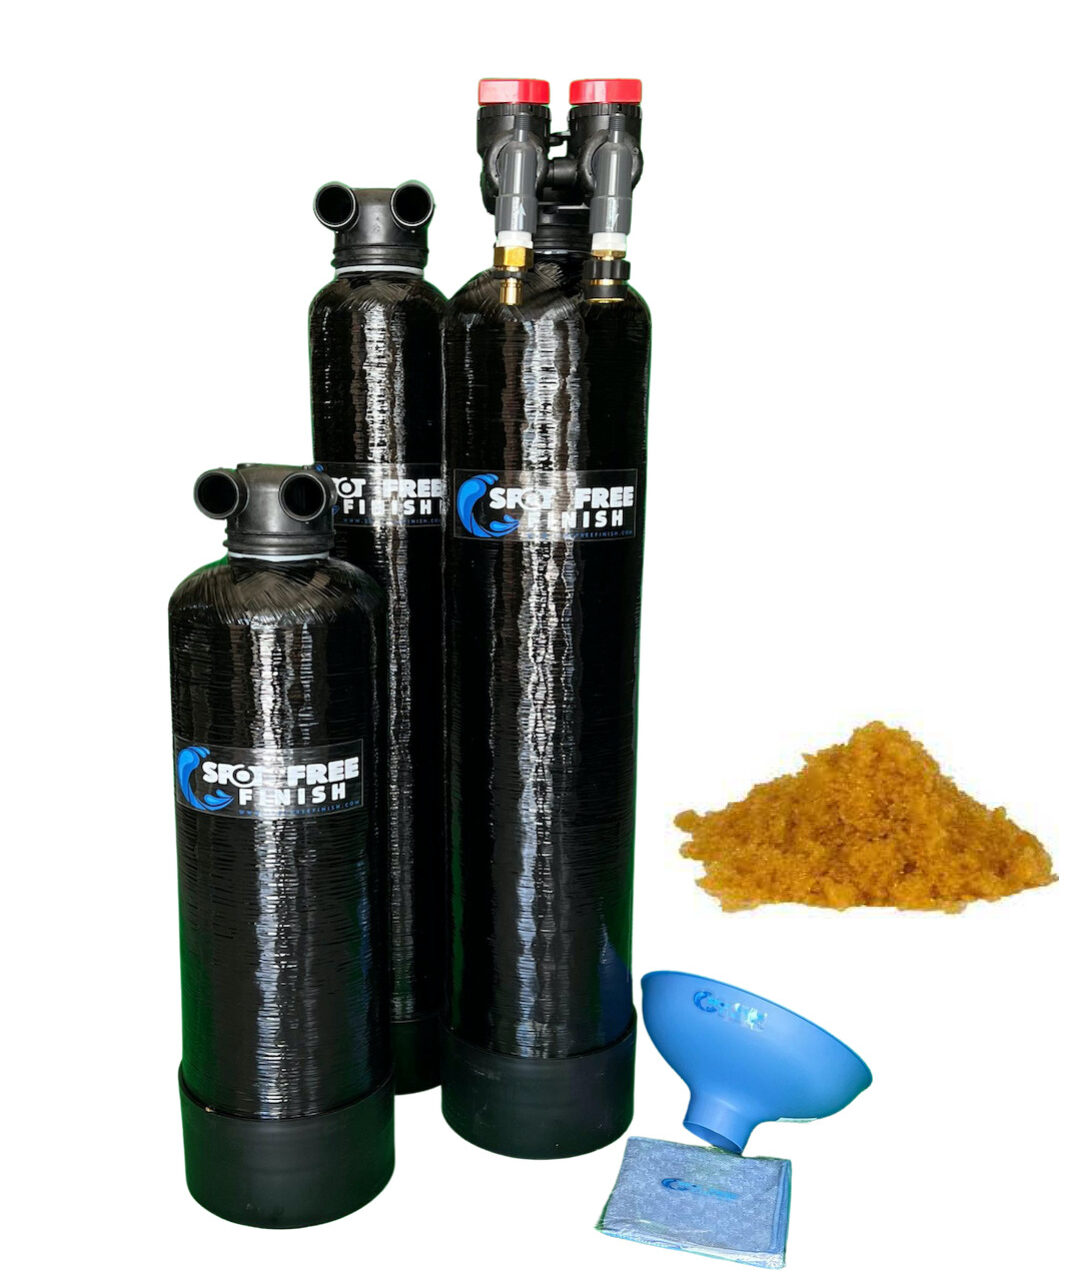 Spot-Free Complete Car Wash Water System